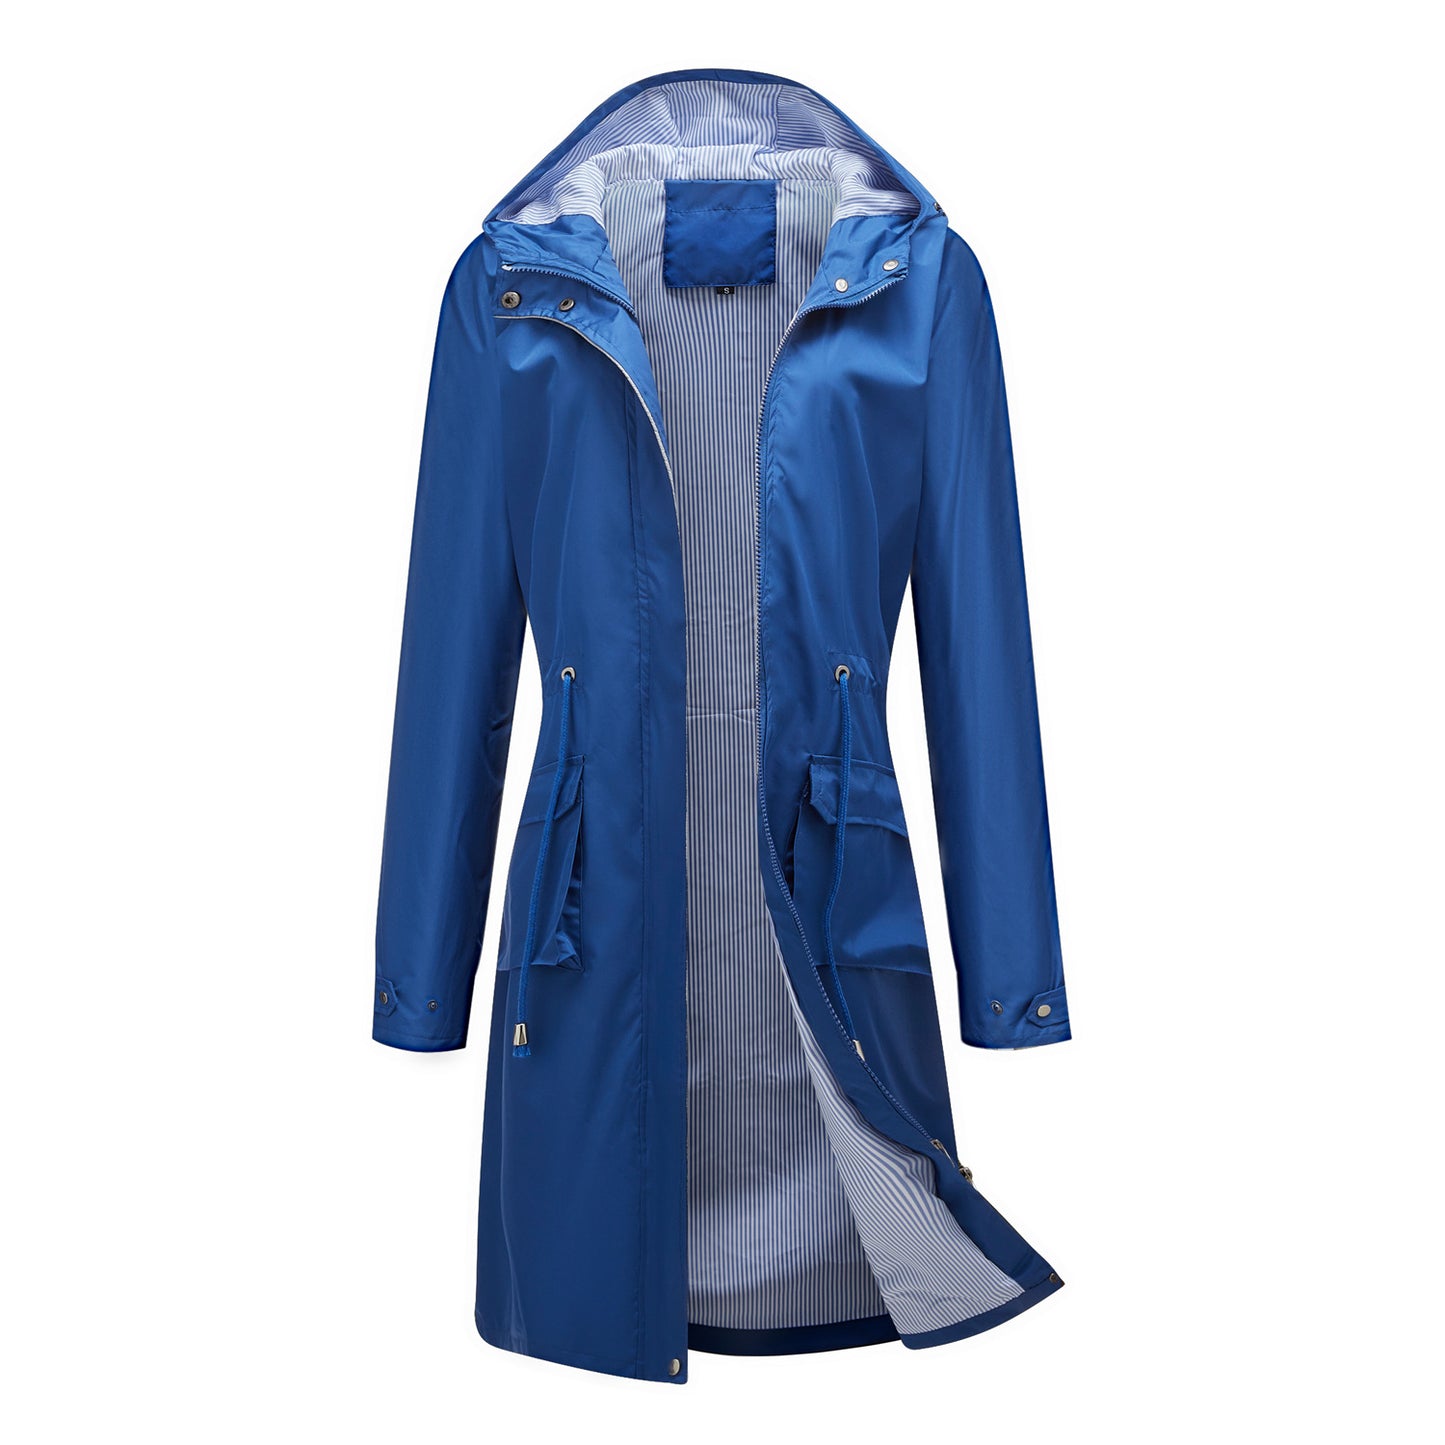 Women's Long Sleeve Hooded Solid Color Jacket